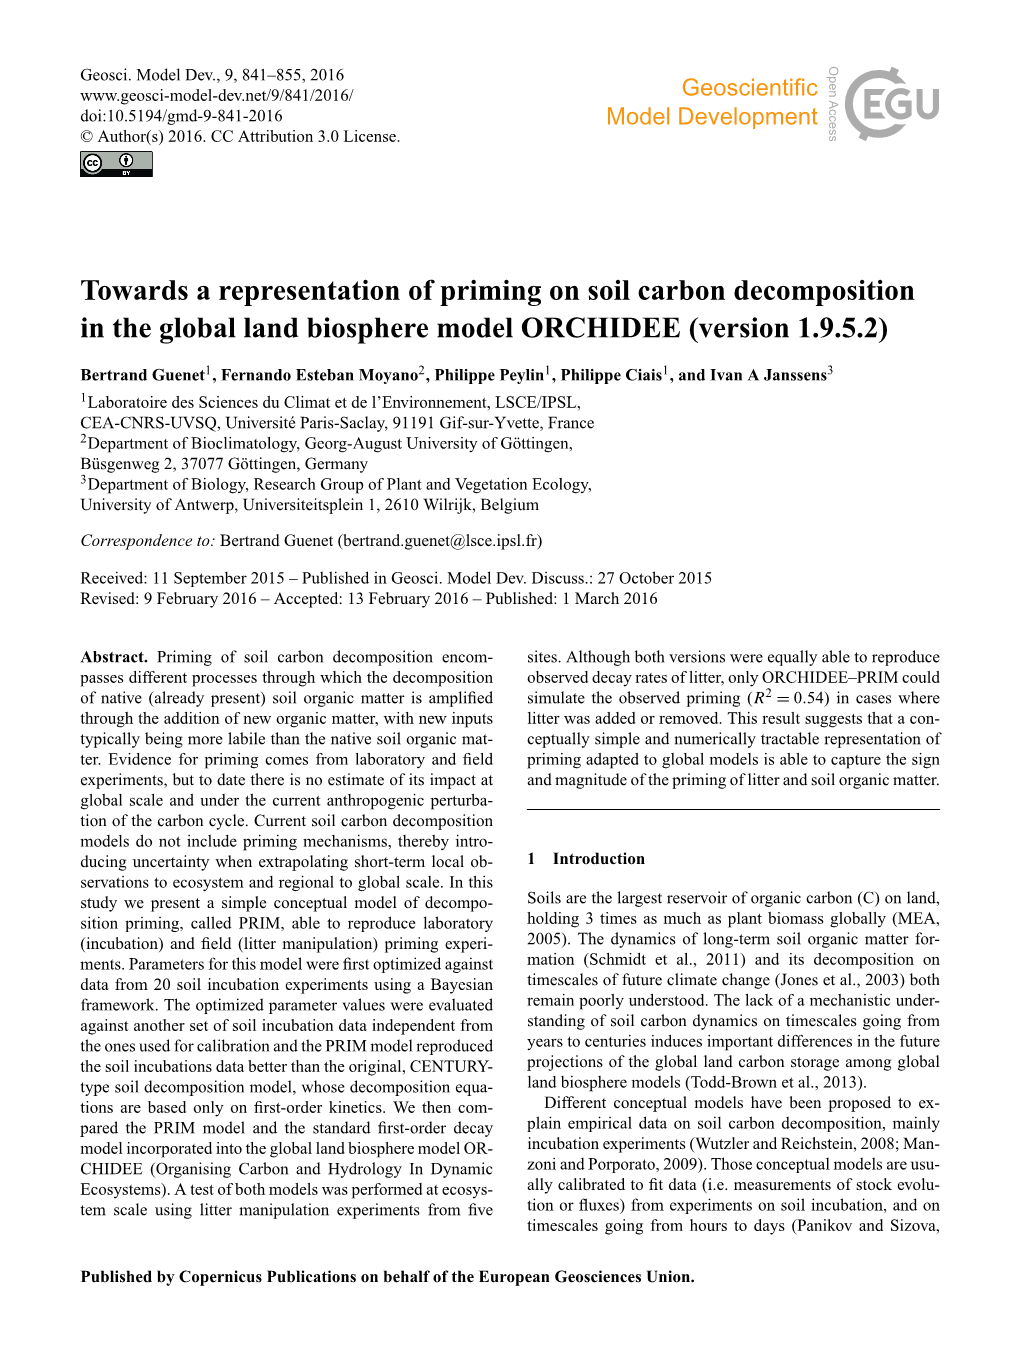 Towards a Representation of Priming on Soil Carbon Decomposition in the Global Land Biosphere Model ORCHIDEE (Version 1.9.5.2)